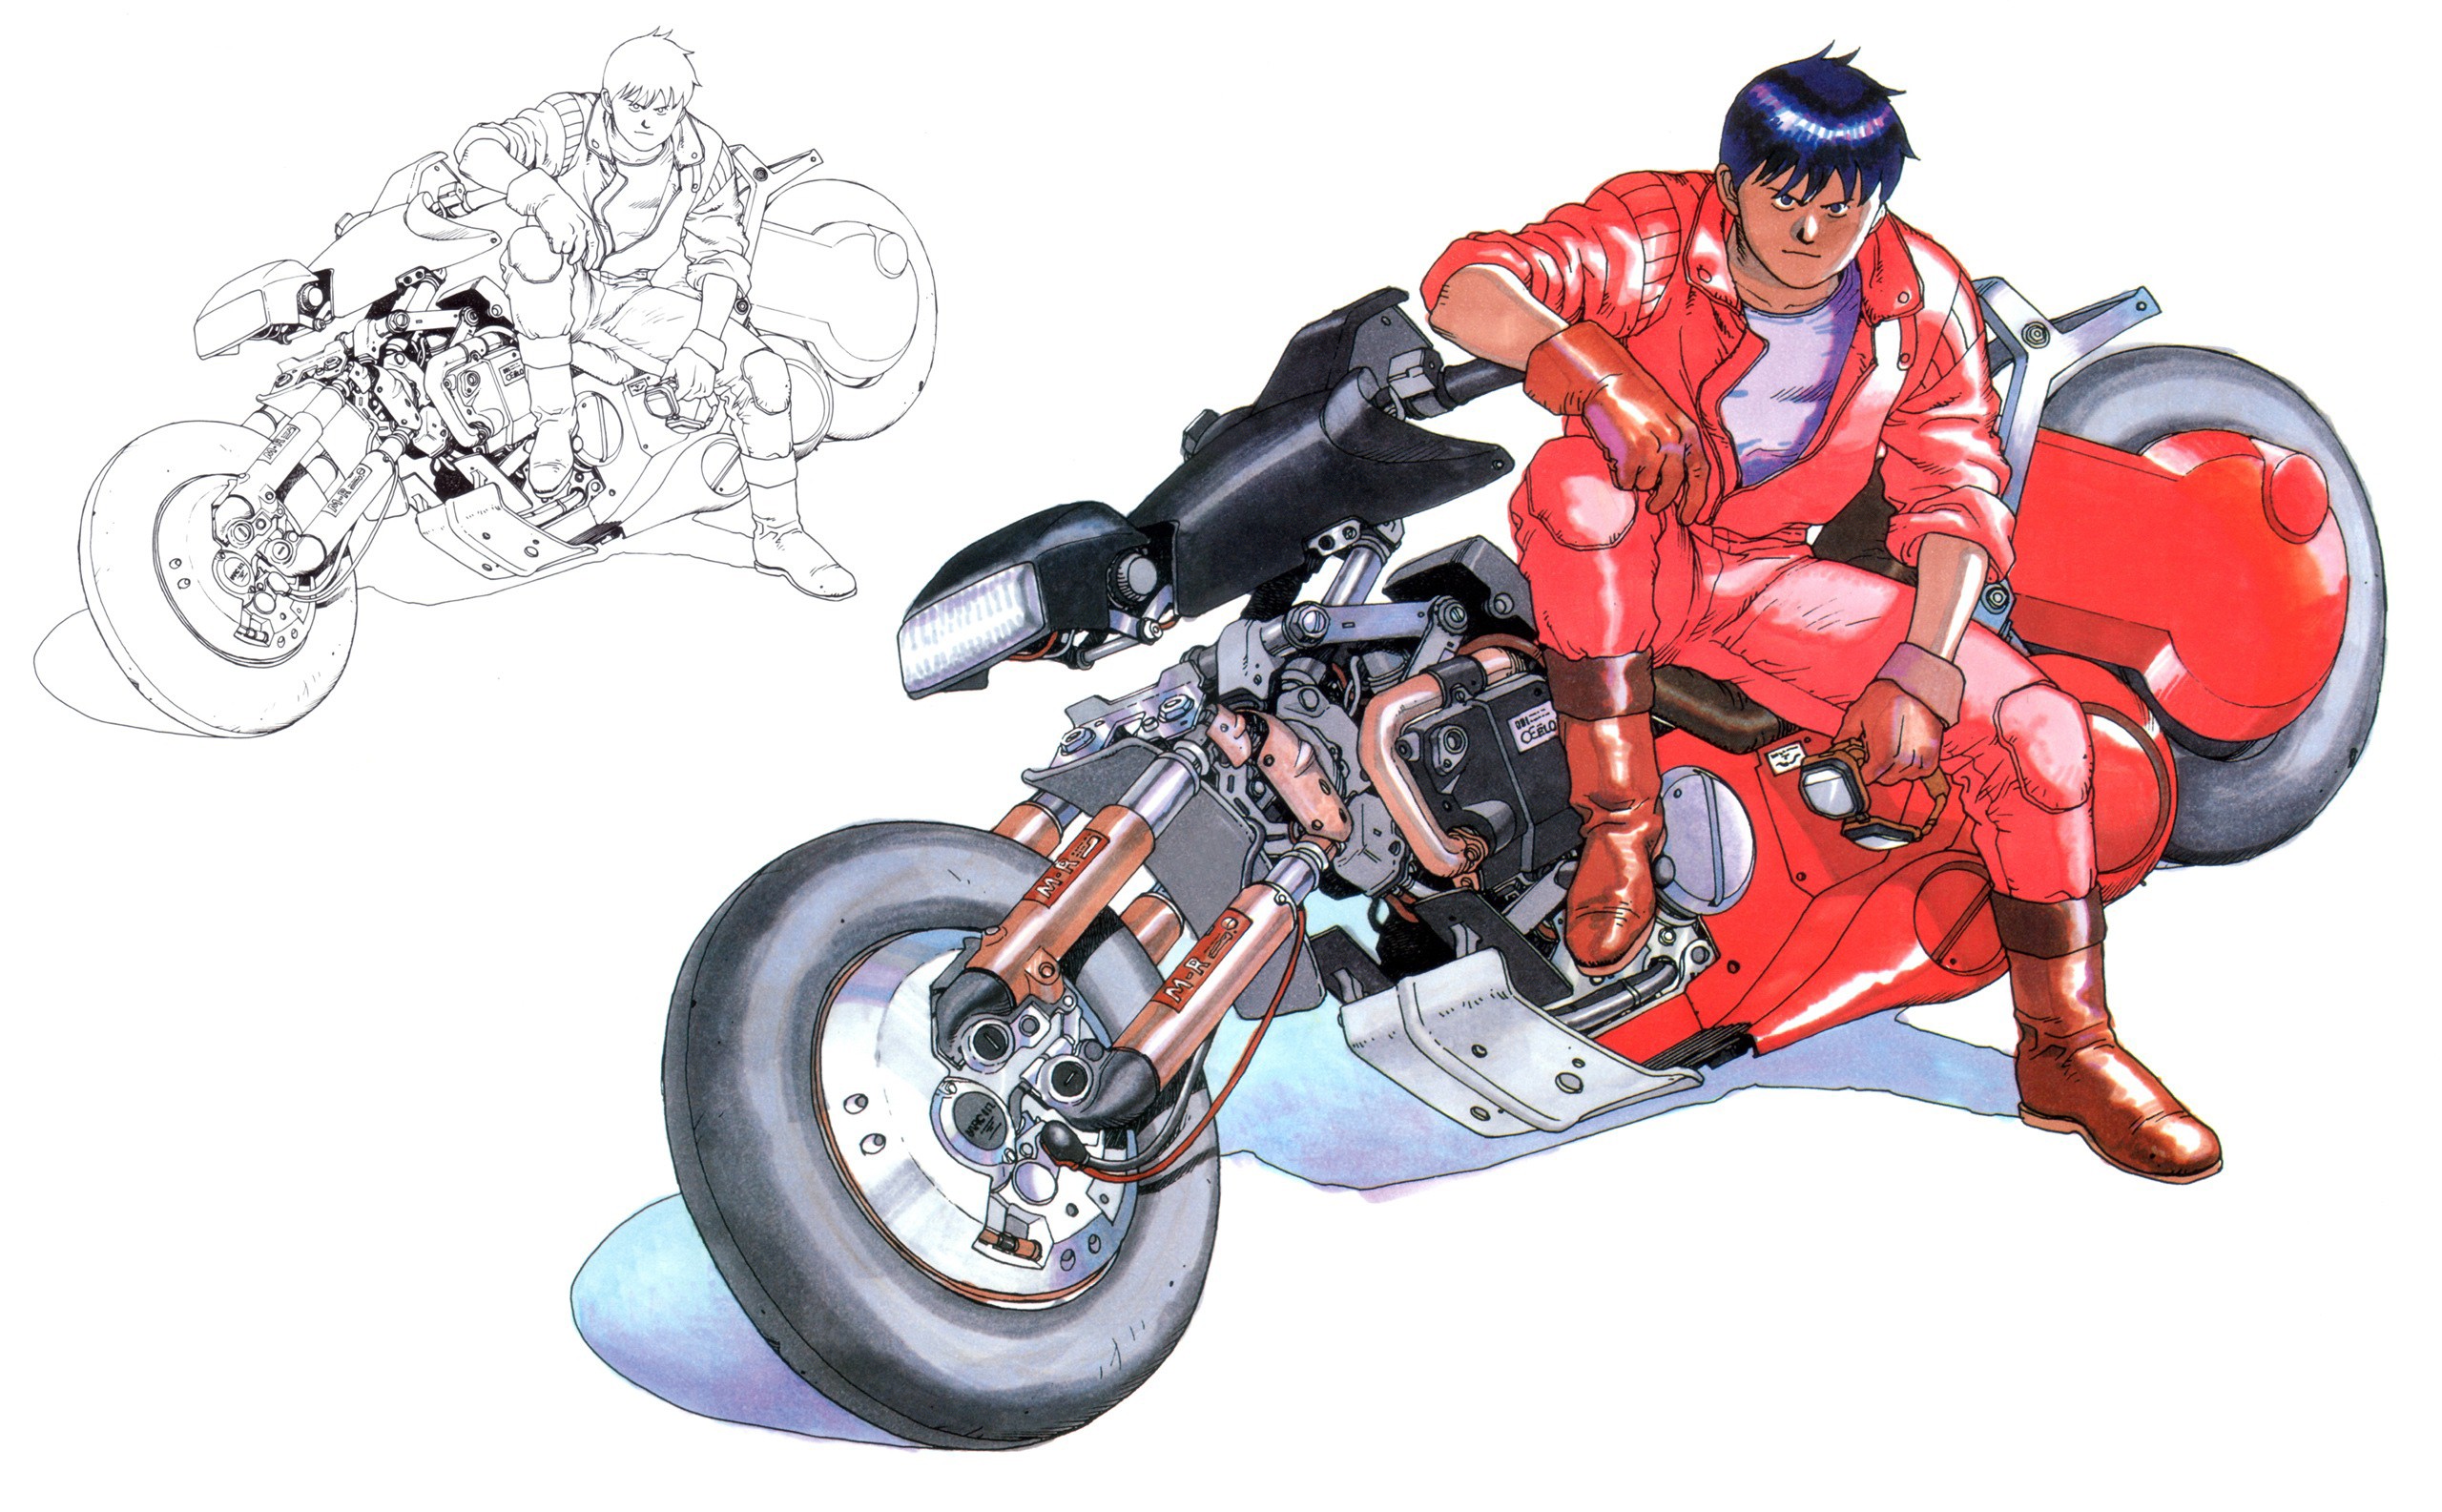 Akira Wallpaper Download Free Hd Wallpapers For Desktop Computers And Smartphones In Any Resolution Desktop Android Iphone Ipad 19x1080 1600x900 1280x900 1440x900 Etc Wallpapertag